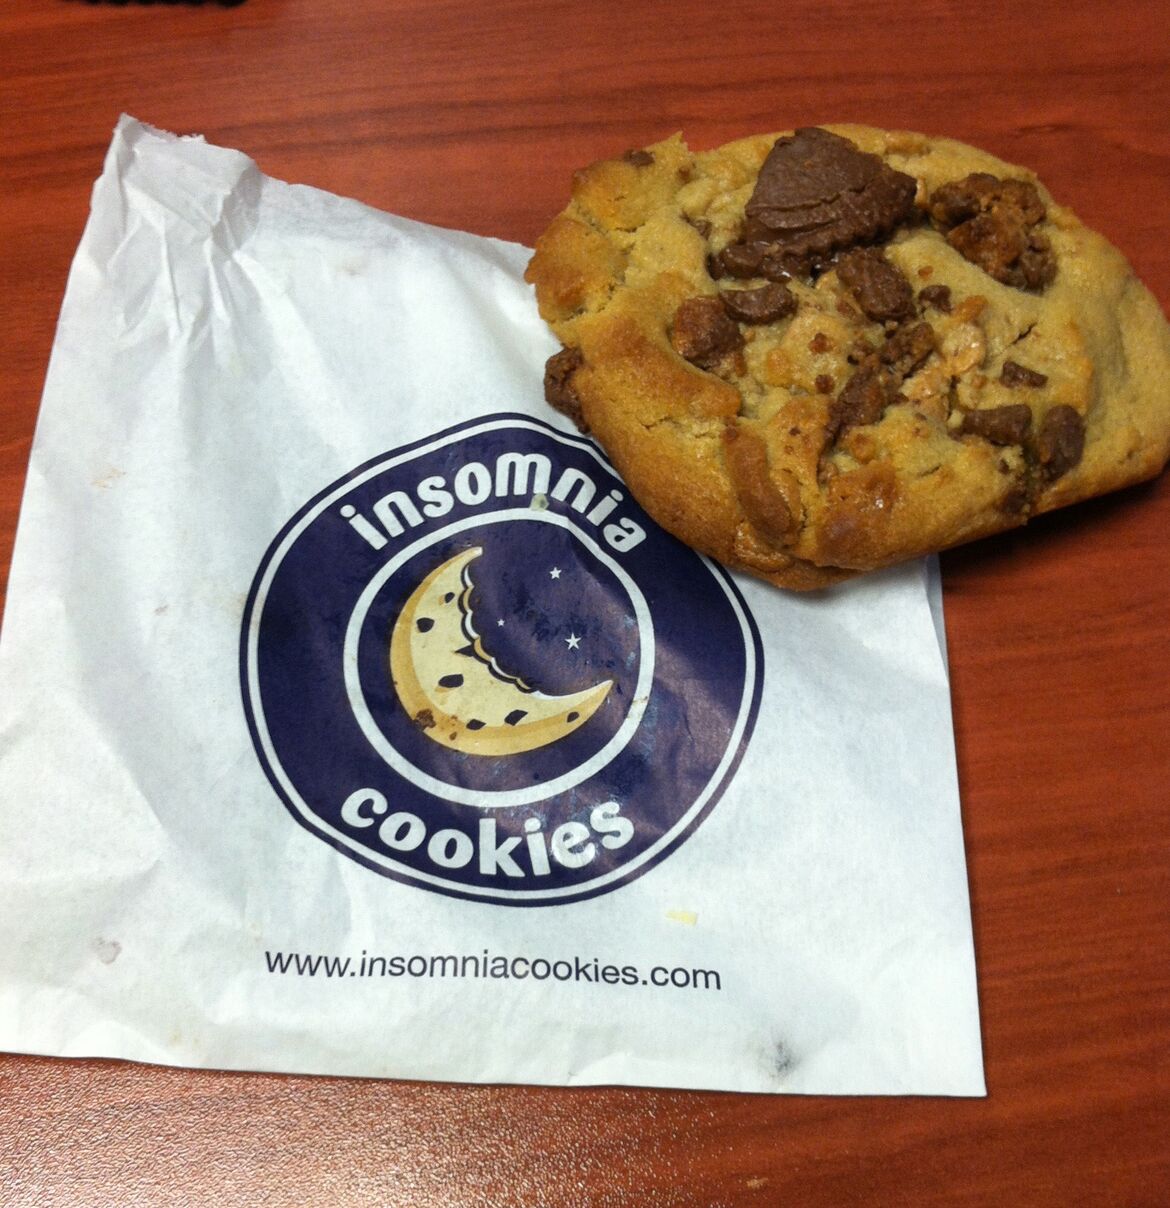 NOW OPEN: Insomnia Cookies Opens on Main Street